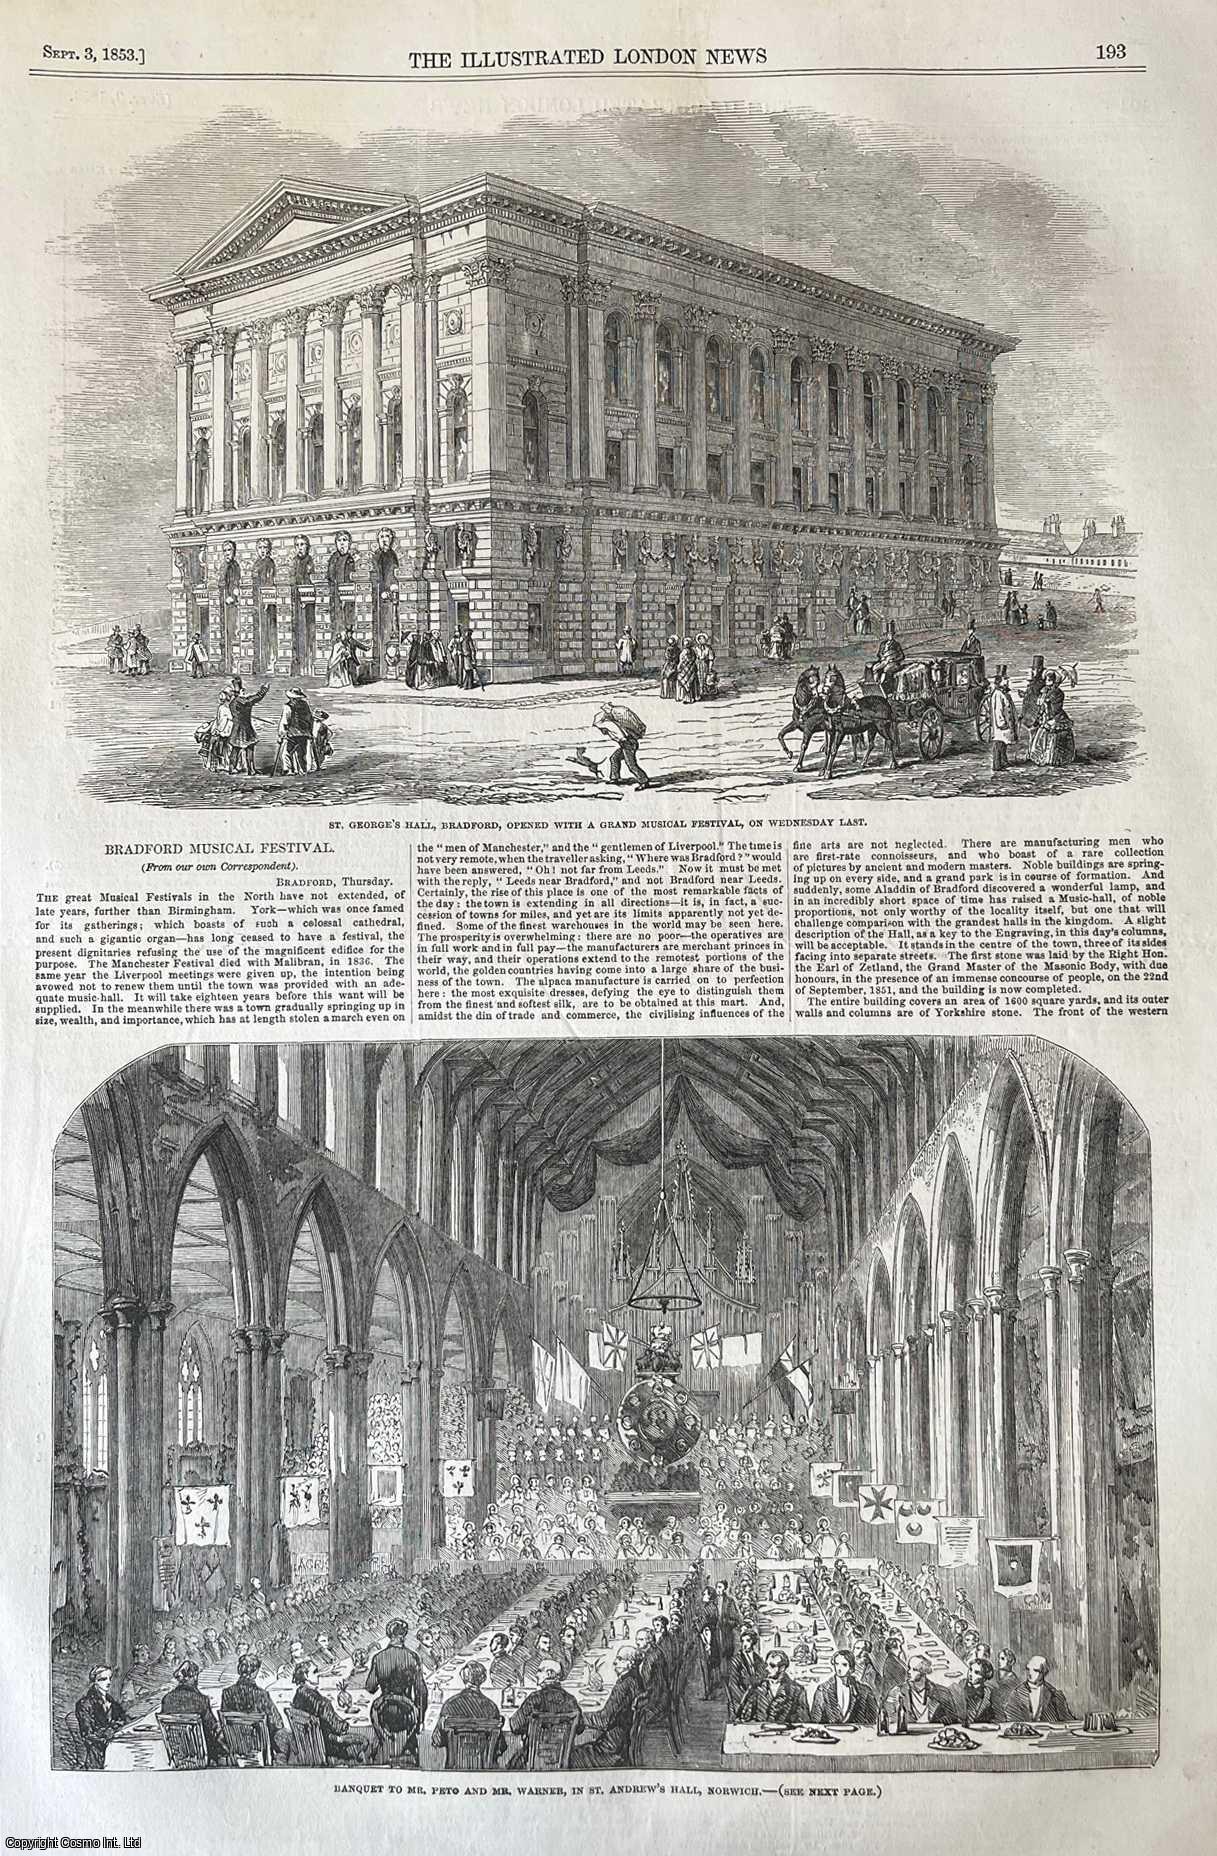 BRADFORD - St George's Hall Bradford; Opening Musical Festival. An original woodcut engraving, with brief accompanying text continuing overleaf, from the Illustrated London News, 1853.